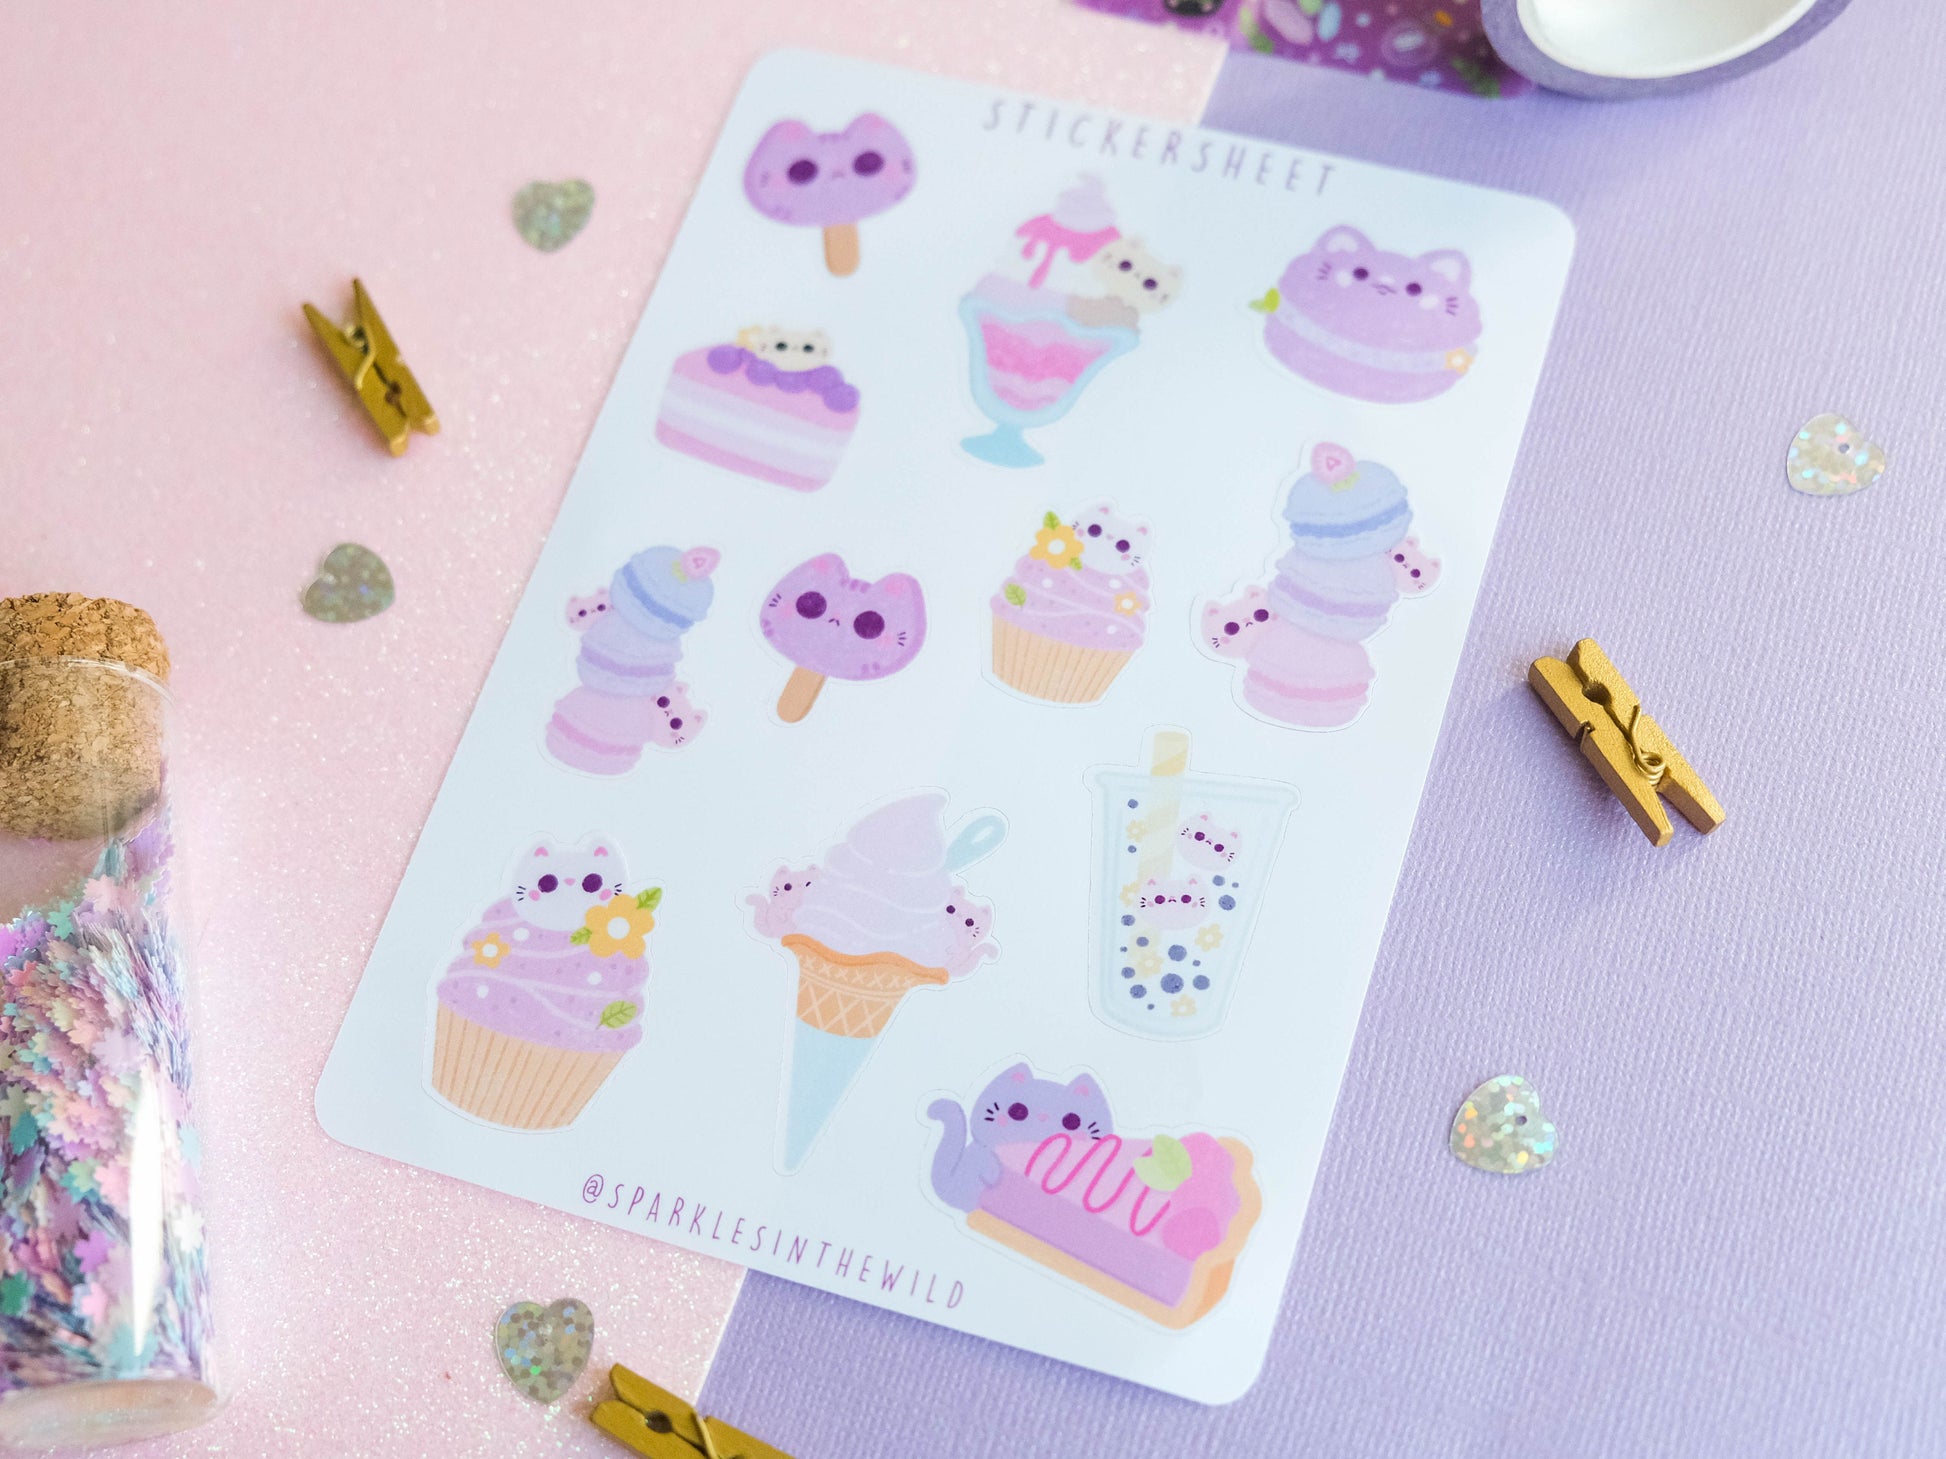 Stickersheet pastel colors water resistant Kawaii Sweets and Bobba with cute cat perfect to decorate bujo and planner